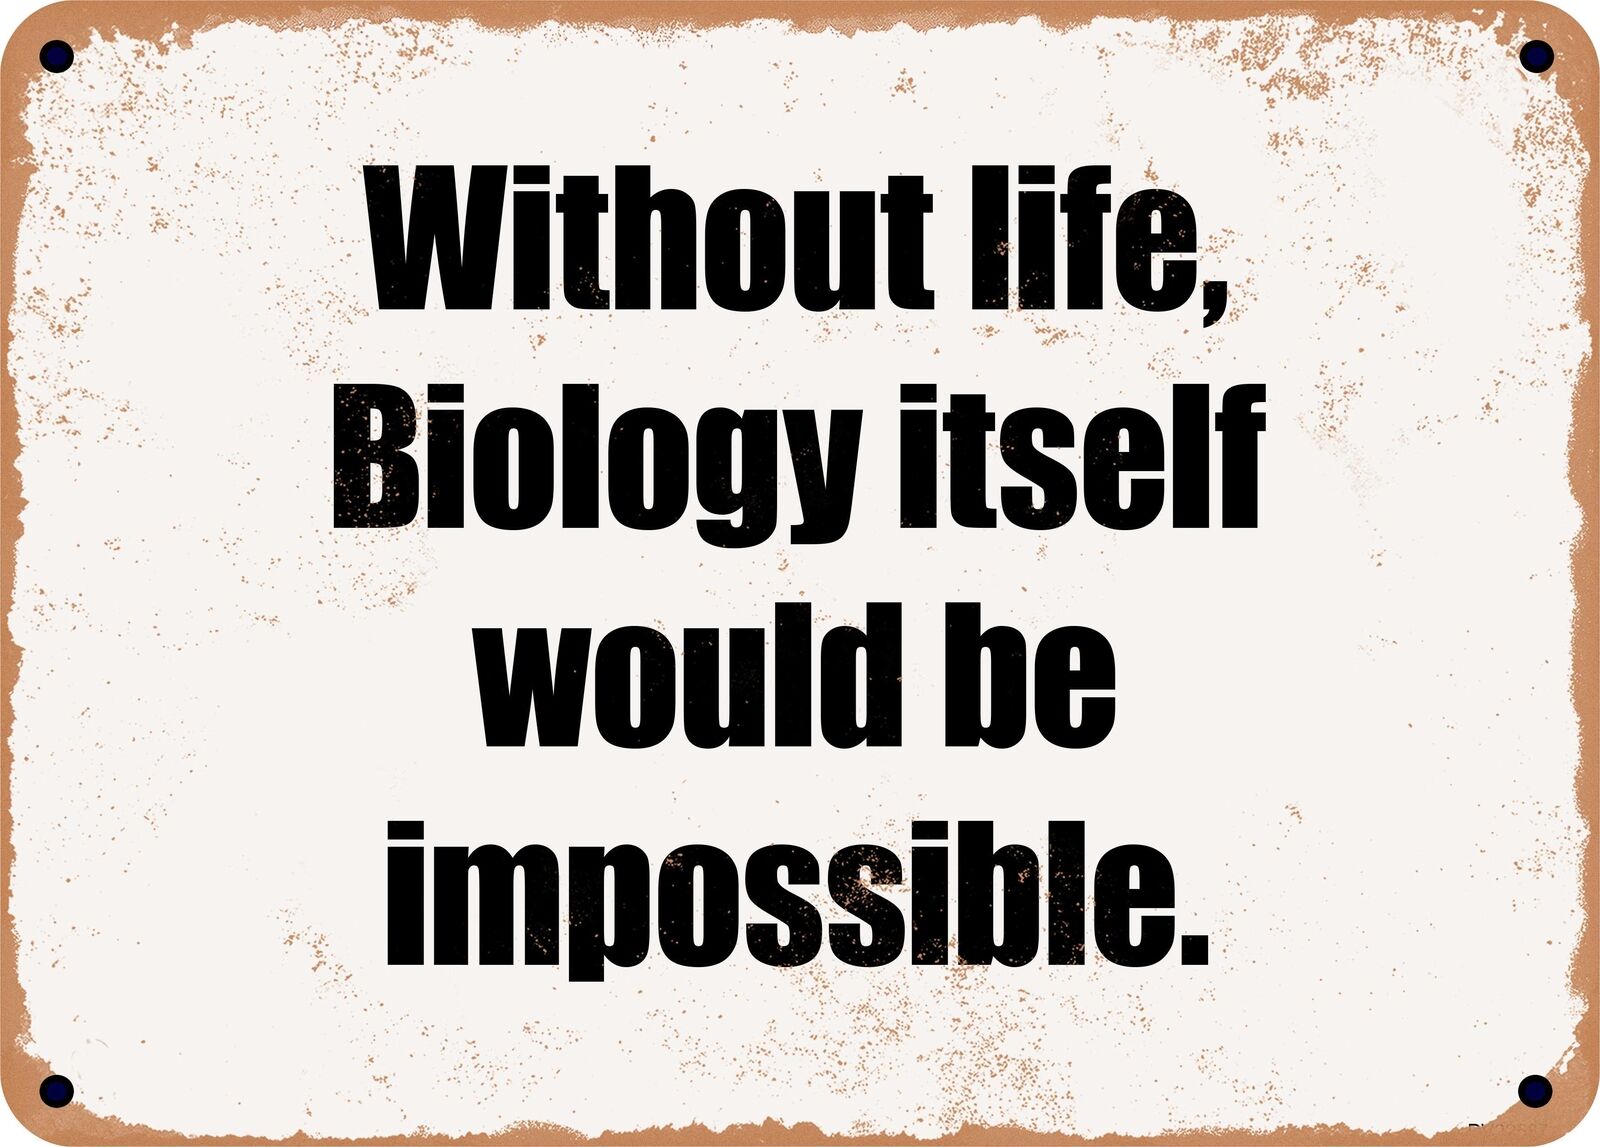 METAL SIGN - Without life, Biology itself would be impossible.